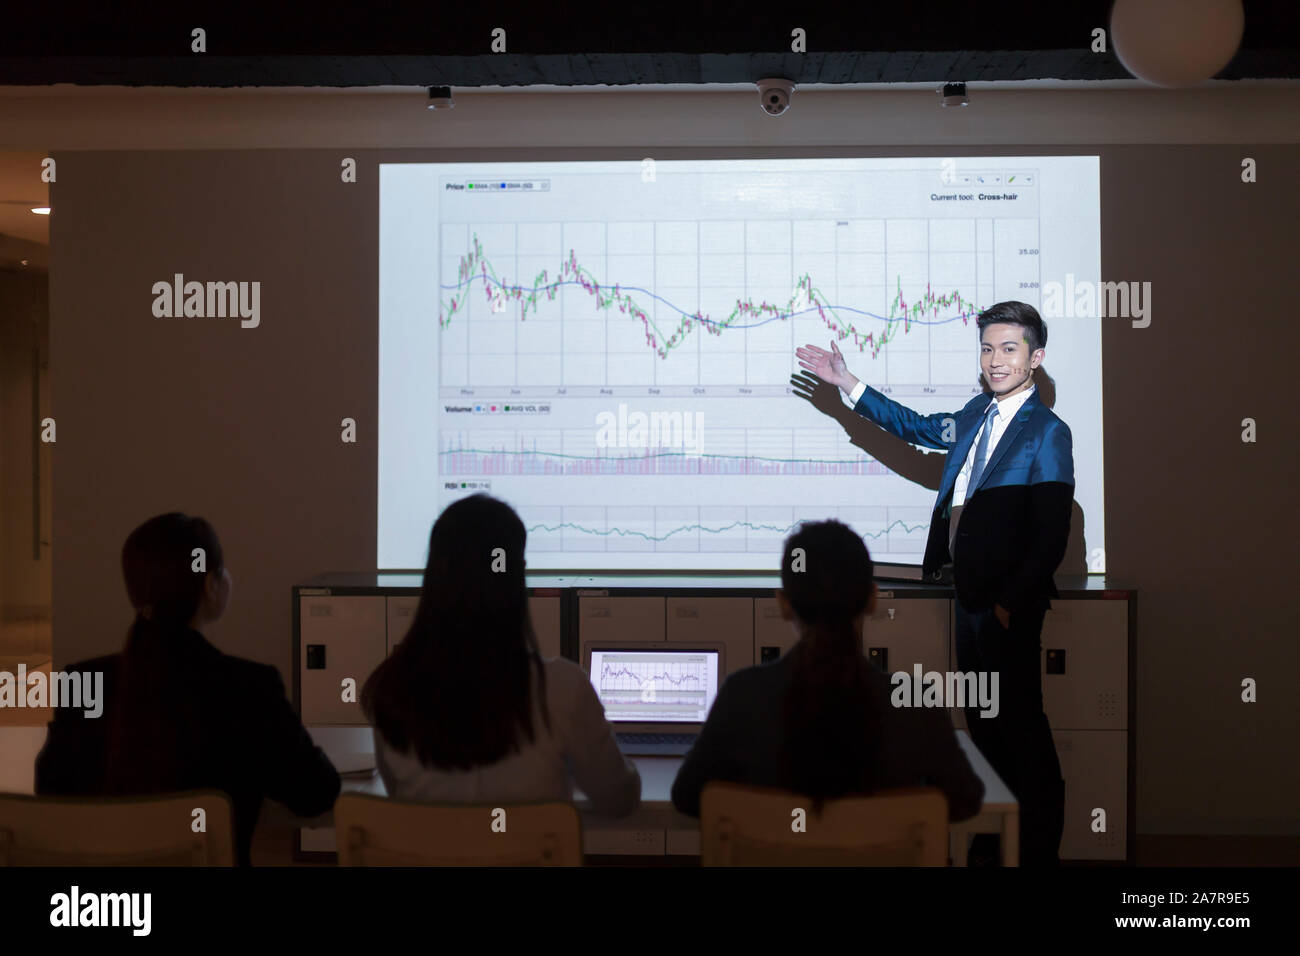 Photograph of a young businessman in a suit giving a presentation with a chart on the screen behind him Stock Photo